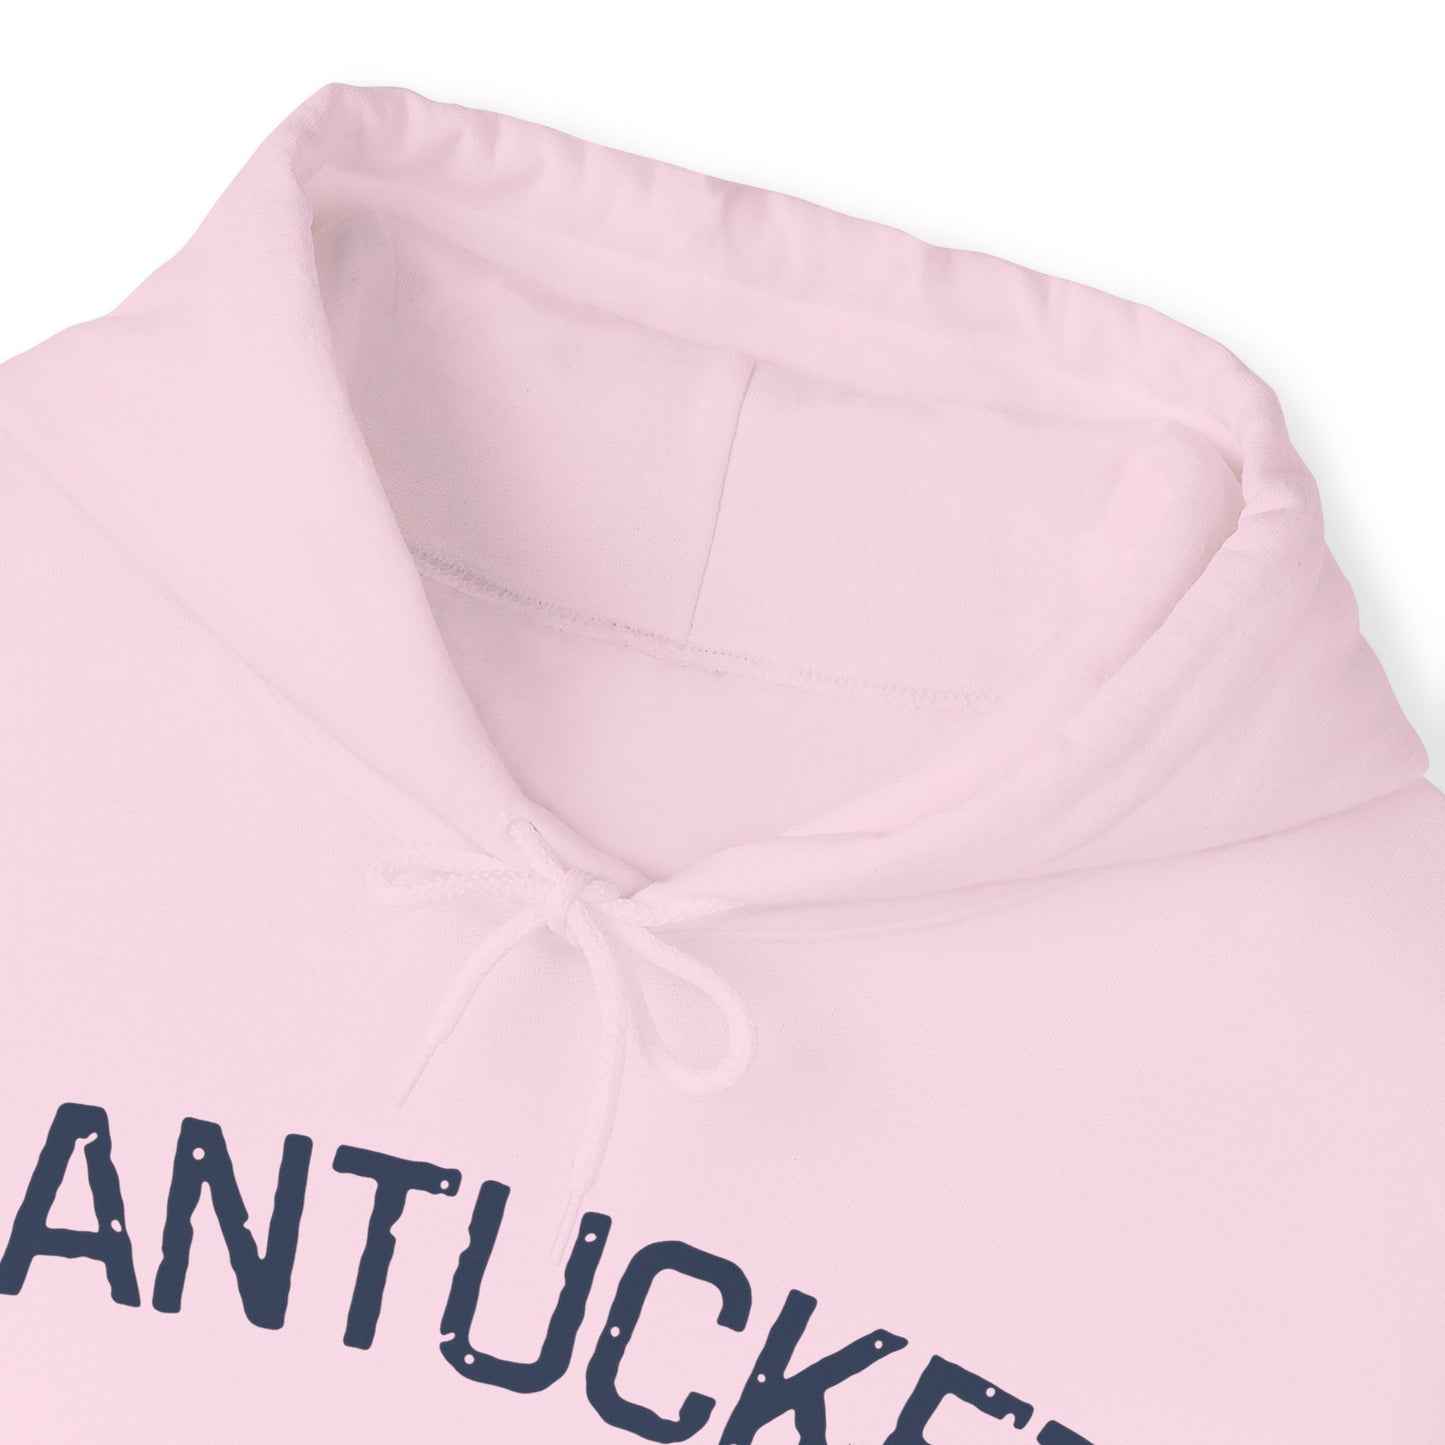 Nantucket Essential Cozy Hoodie - Unisex, Cotton-Poly Blend for Ultimate Comfort